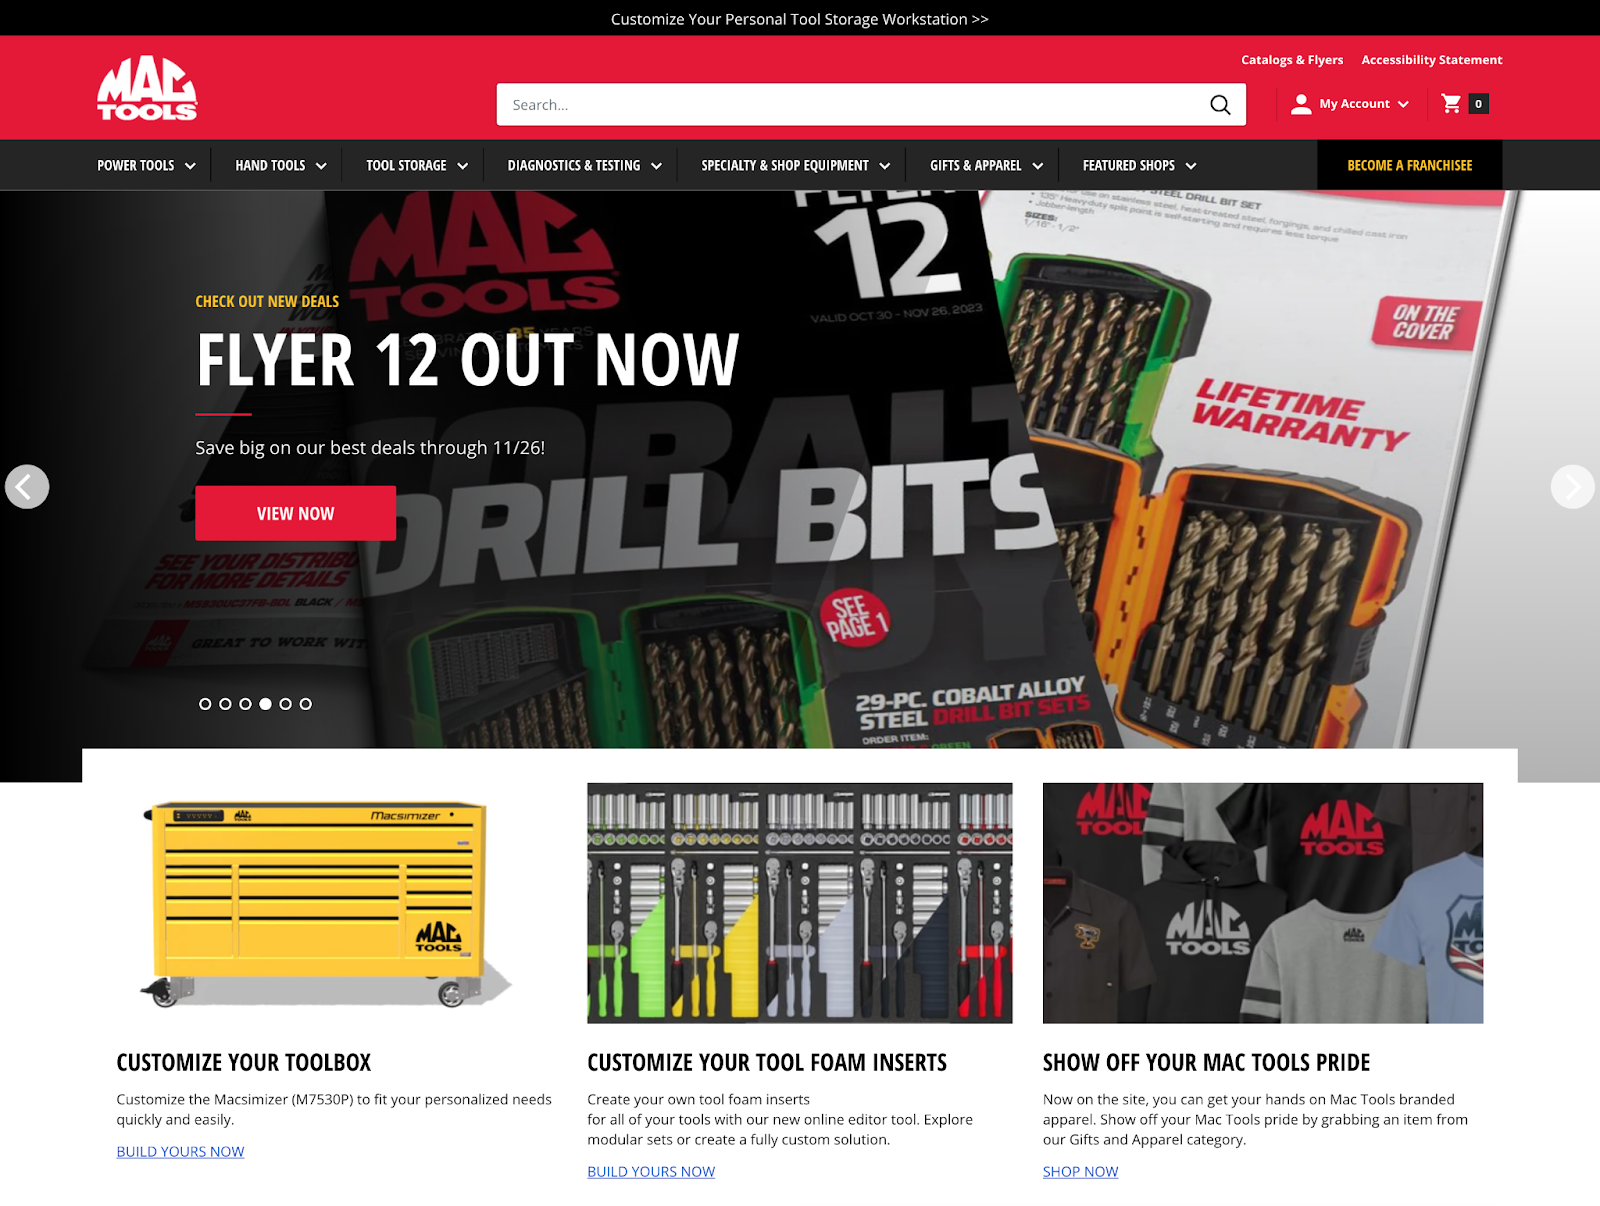 The Mac Tools homepage; the hero image is the latest flier, below it are customization and shopping options